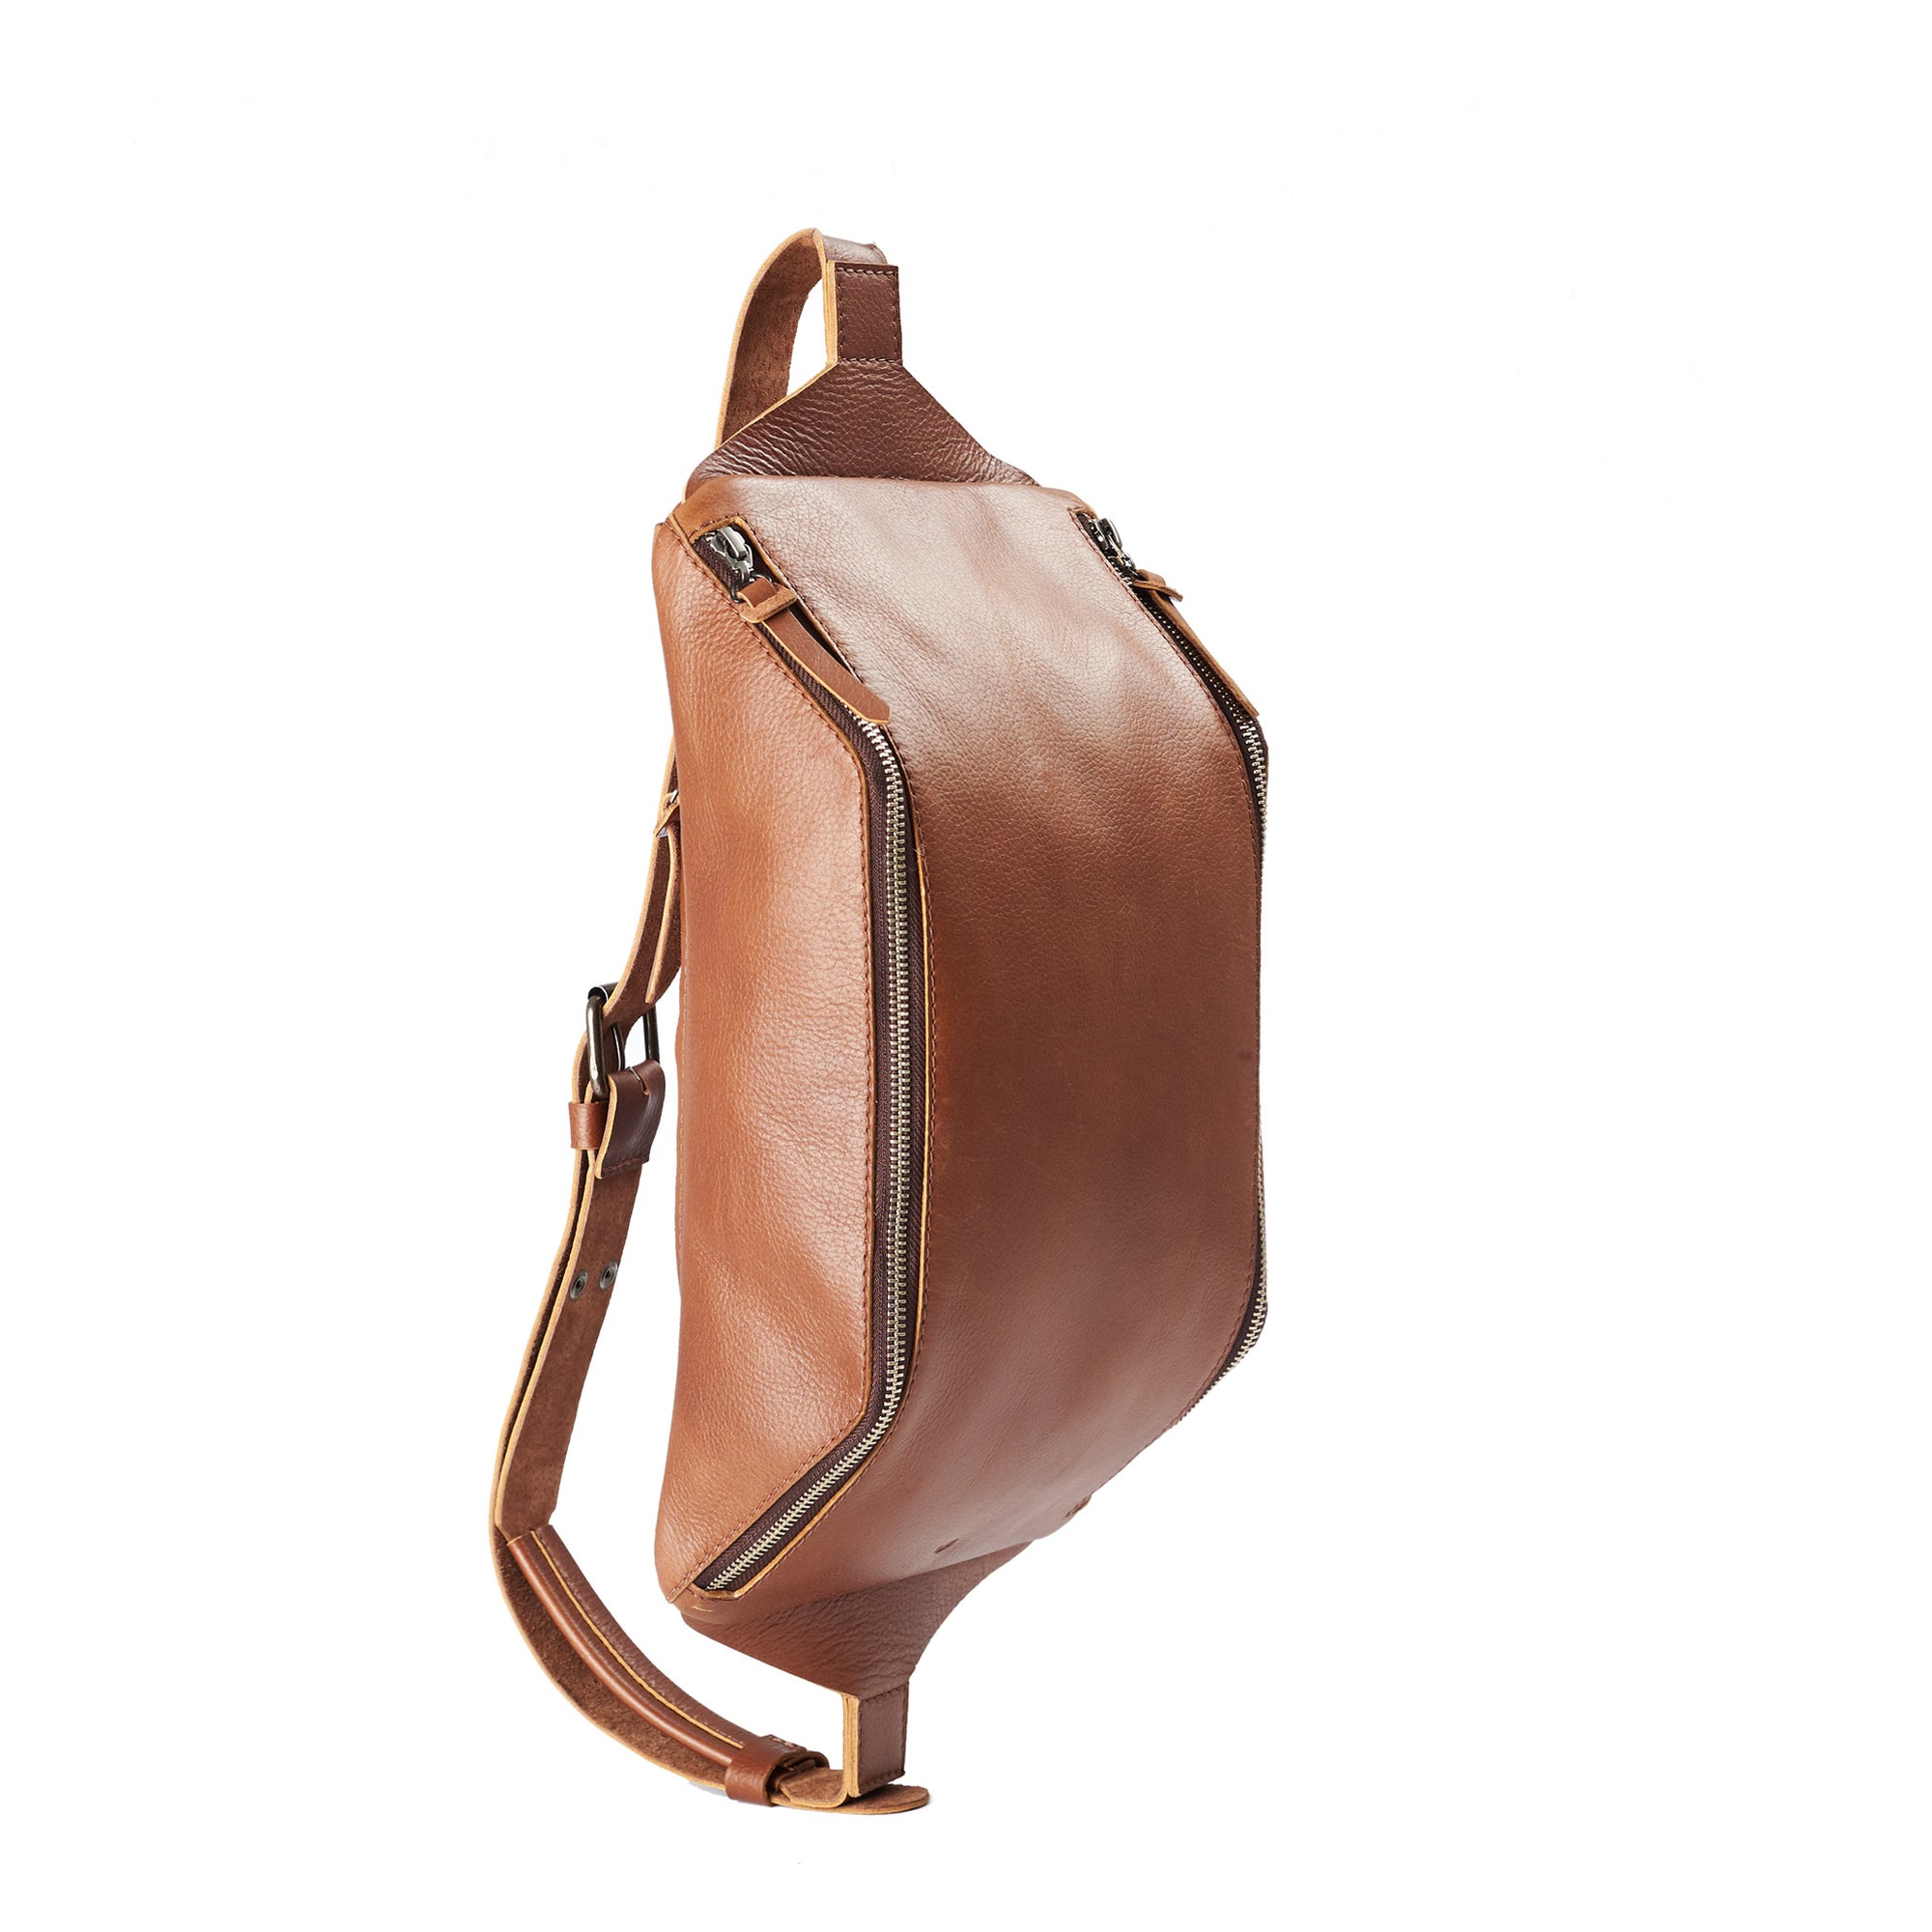 Tan Fenek sling bag backpack made by Capra Leather. Frontal view of small leather crossbody and single strap.